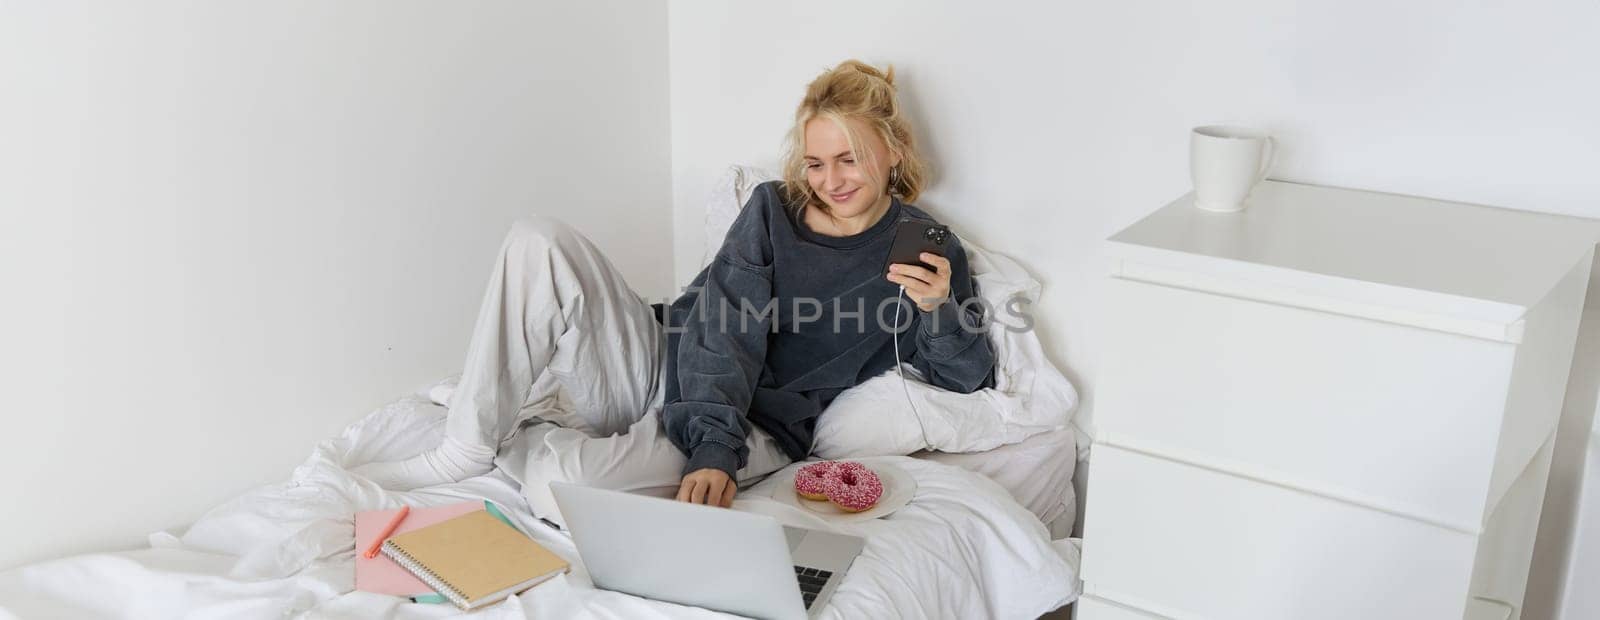 Lifestyle and weekend concept. Young smiling woman, relaxing at home, lying in bed with cup of tea and doughnut, using laptop and smartphone in bedroom.